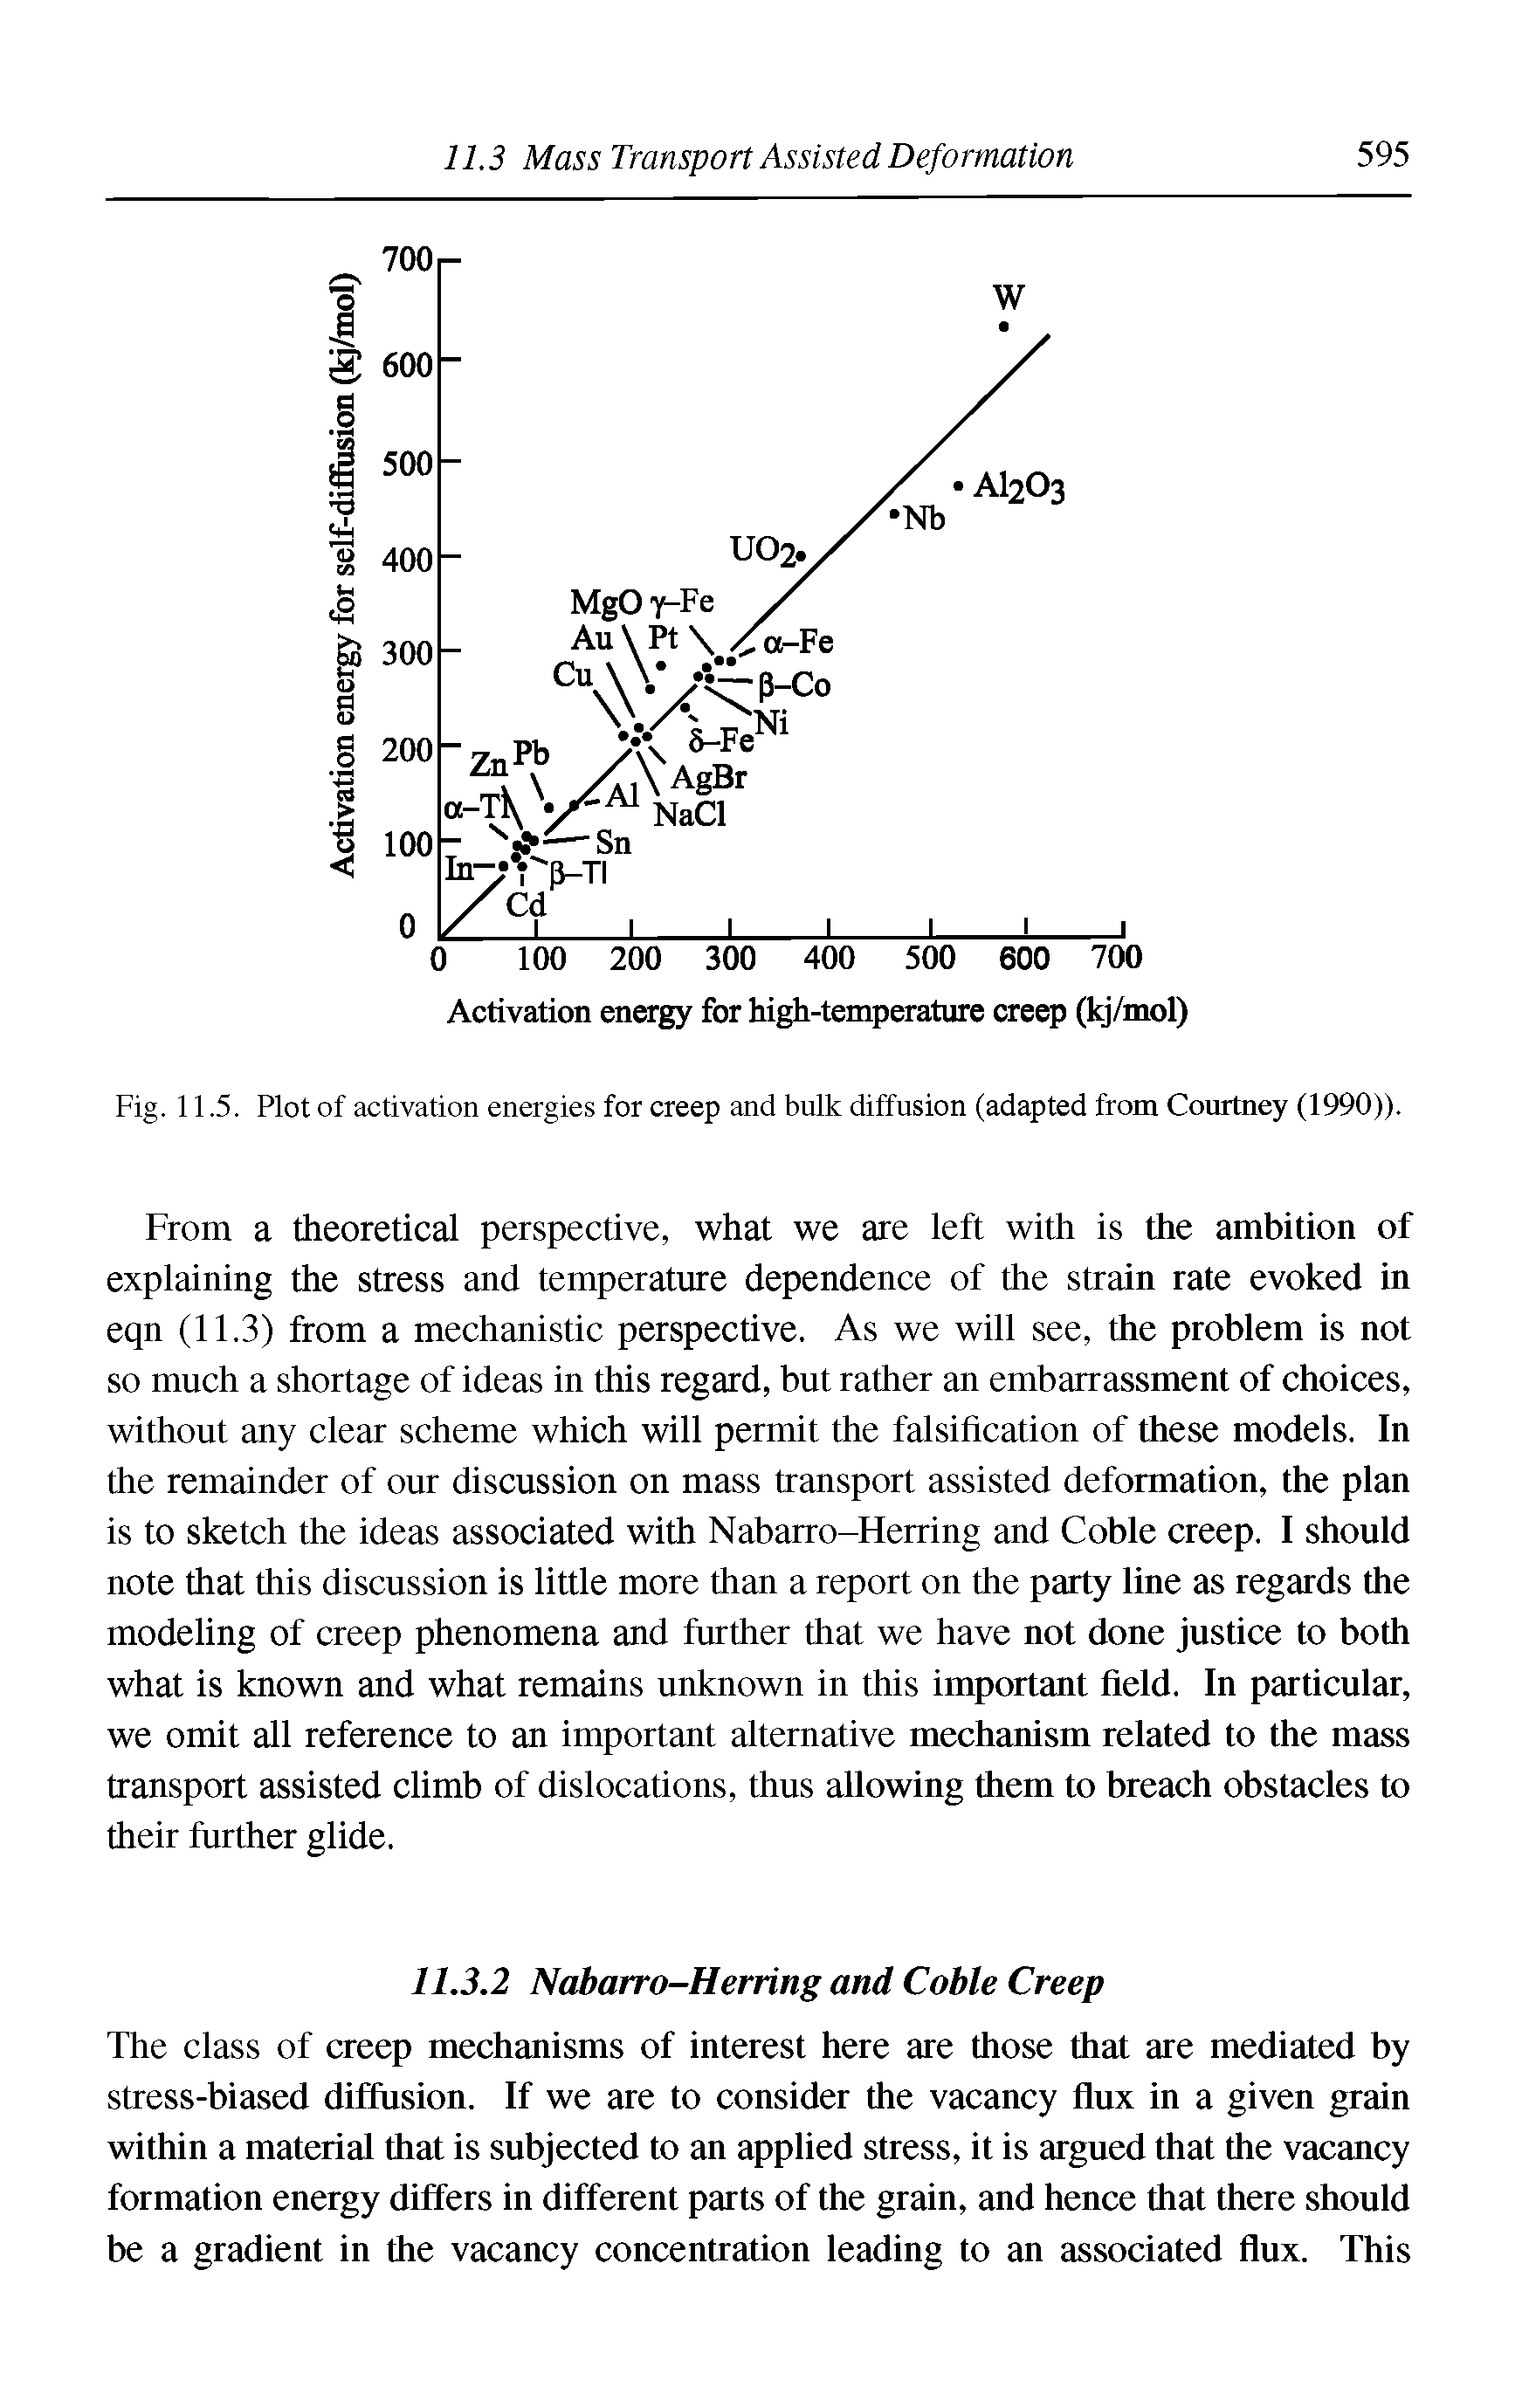 Fig. 11.5. Plot of activation energies for creep and bulk diffusion (adapted from Courtney (1990)).